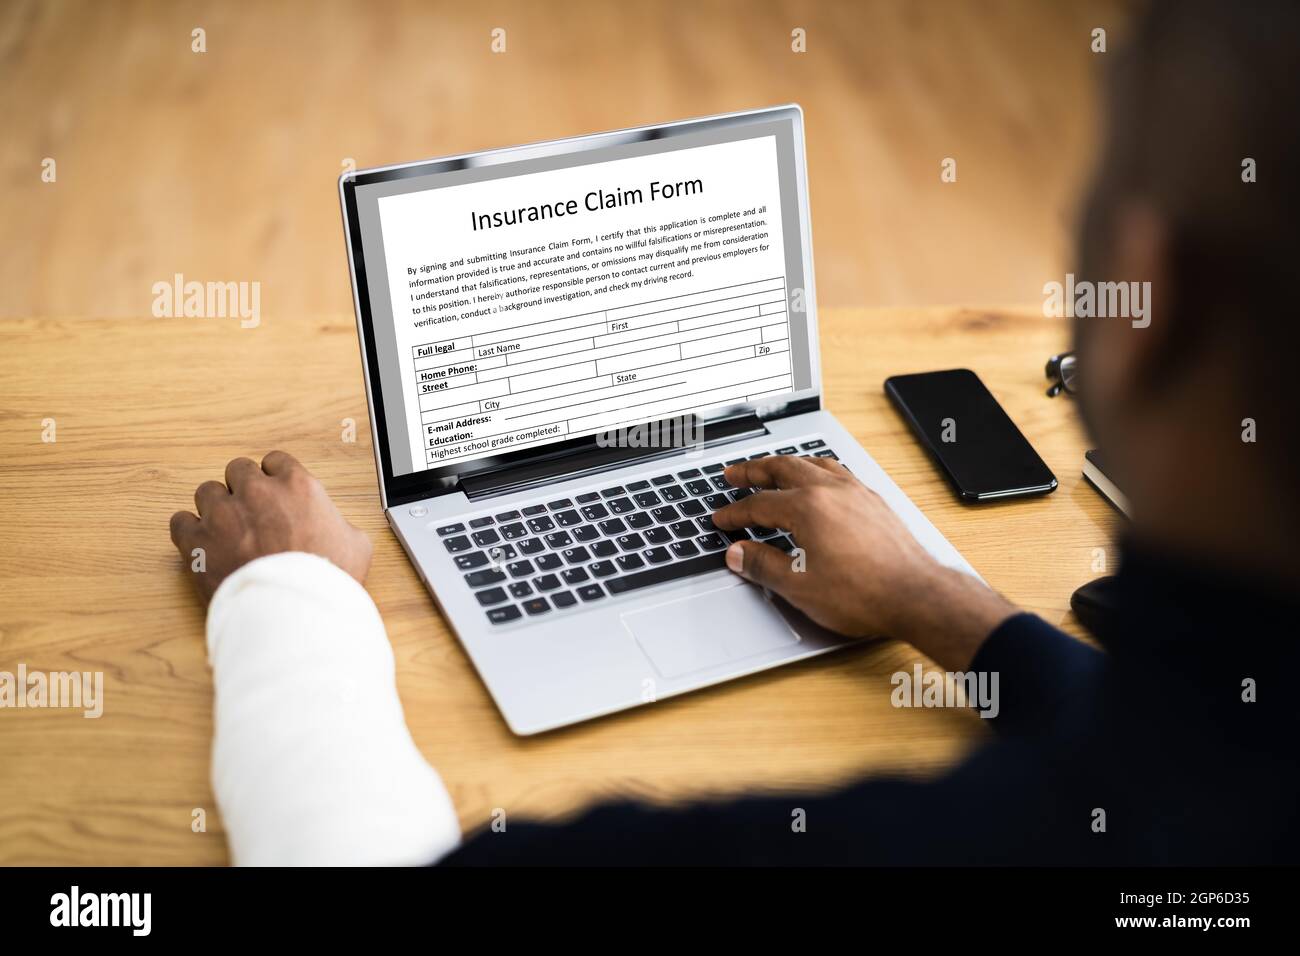 Broken Arm Injured Worker Compensation Coverage. Using Office Laptop Stock Photo